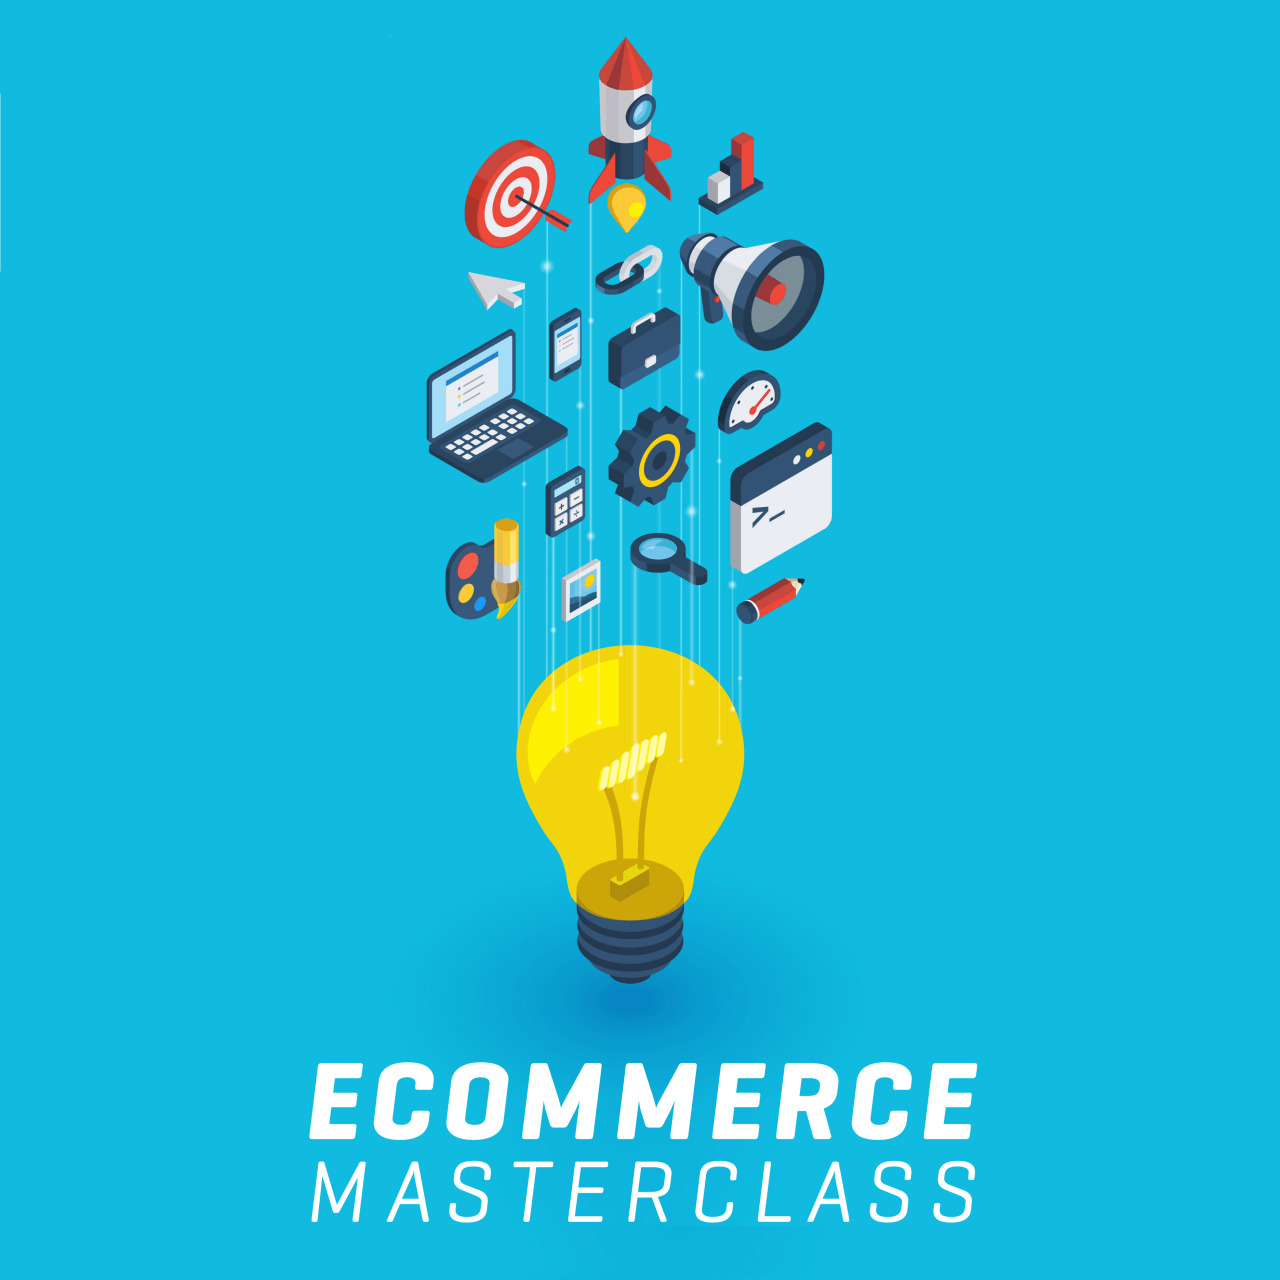 [SUPER HOT SHARE] Branded Ecommerce Masterclass Download